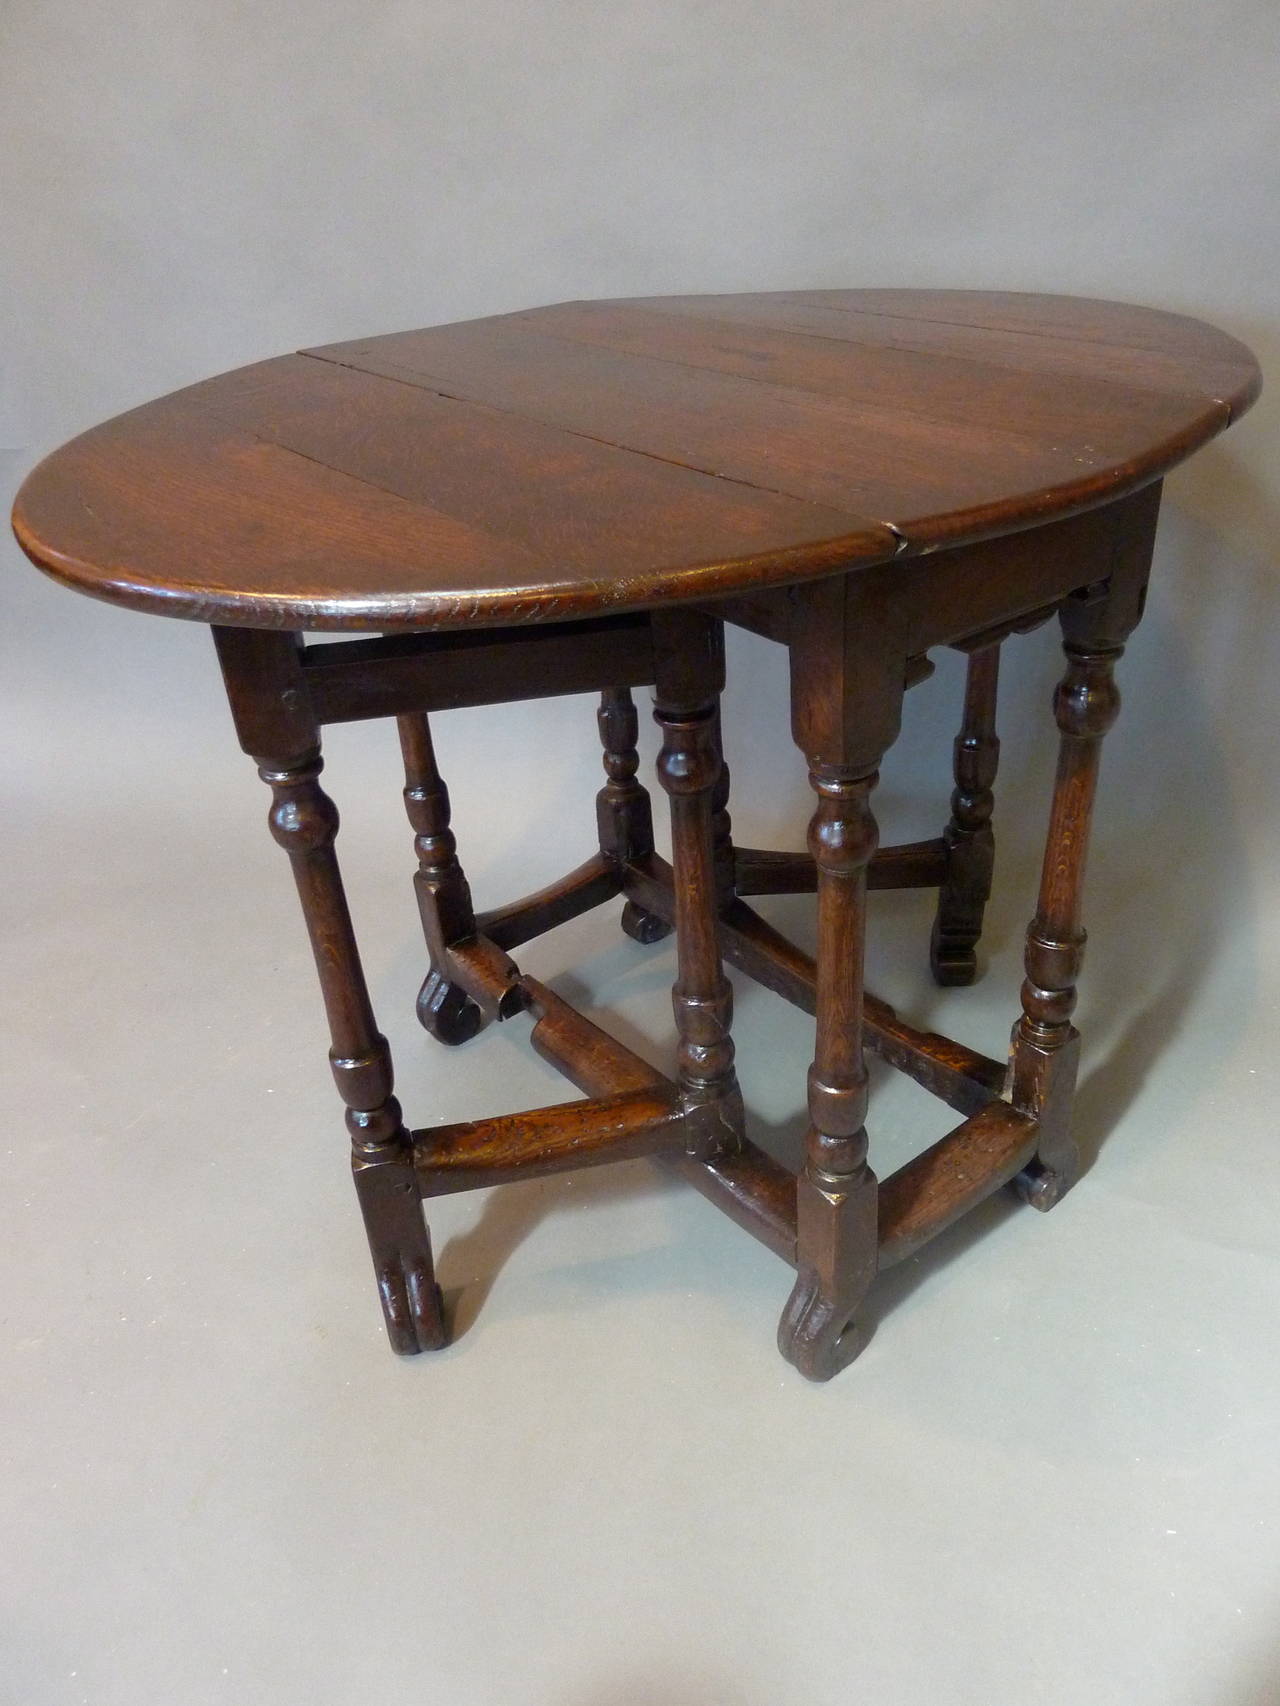 A Small Charles II Period 17th Century Gateleg Tavern Table. Made of richly patinated oak with a deep lustrous color. Unusual small proportions with elegant turned legs and carved scroll feet. Purchased from a pub in Oxfordshire.  Made in England